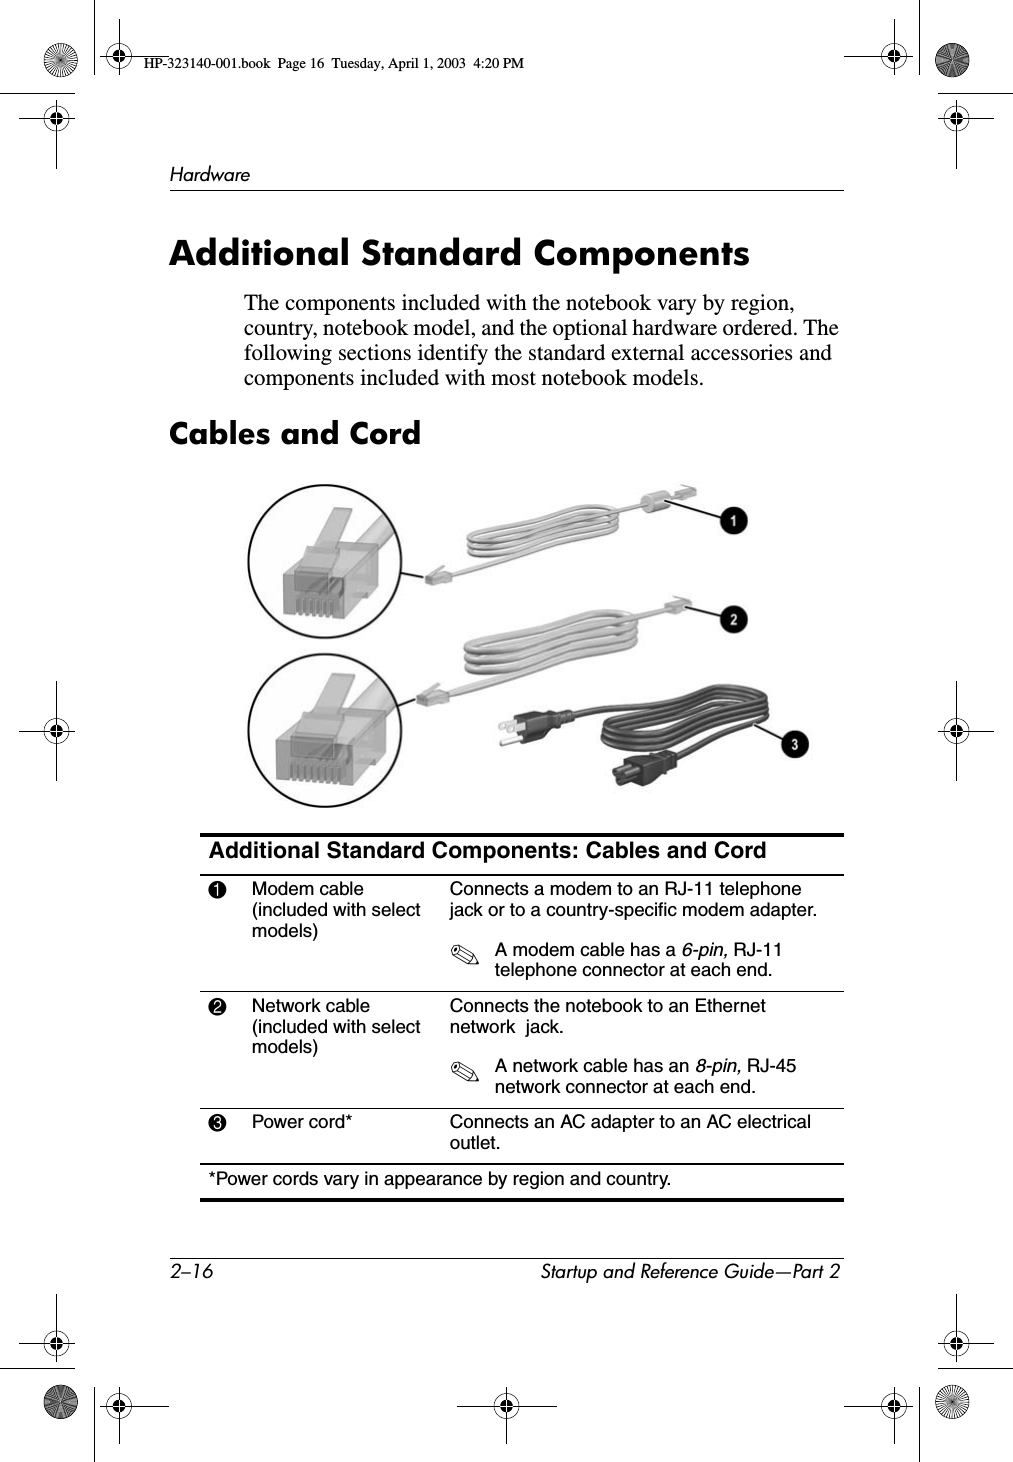 2–16 Startup and Reference Guide—Part 2HardwareAdditional Standard ComponentsThe components included with the notebook vary by region, country, notebook model, and the optional hardware ordered. The following sections identify the standard external accessories and components included with most notebook models.Cables and CordAdditional Standard Components: Cables and Cord1Modem cable (included with select models)Connects a modem to an RJ-11 telephone jack or to a country-specific modem adapter.✎A modem cable has a 6-pin, RJ-11 telephone connector at each end.2Network cable(included with select models)Connects the notebook to an Ethernet network  jack.✎A network cable has an 8-pin, RJ-45 network connector at each end.3Power cord* Connects an AC adapter to an AC electrical outlet.*Power cords vary in appearance by region and country.HP-323140-001.book  Page 16  Tuesday, April 1, 2003  4:20 PM